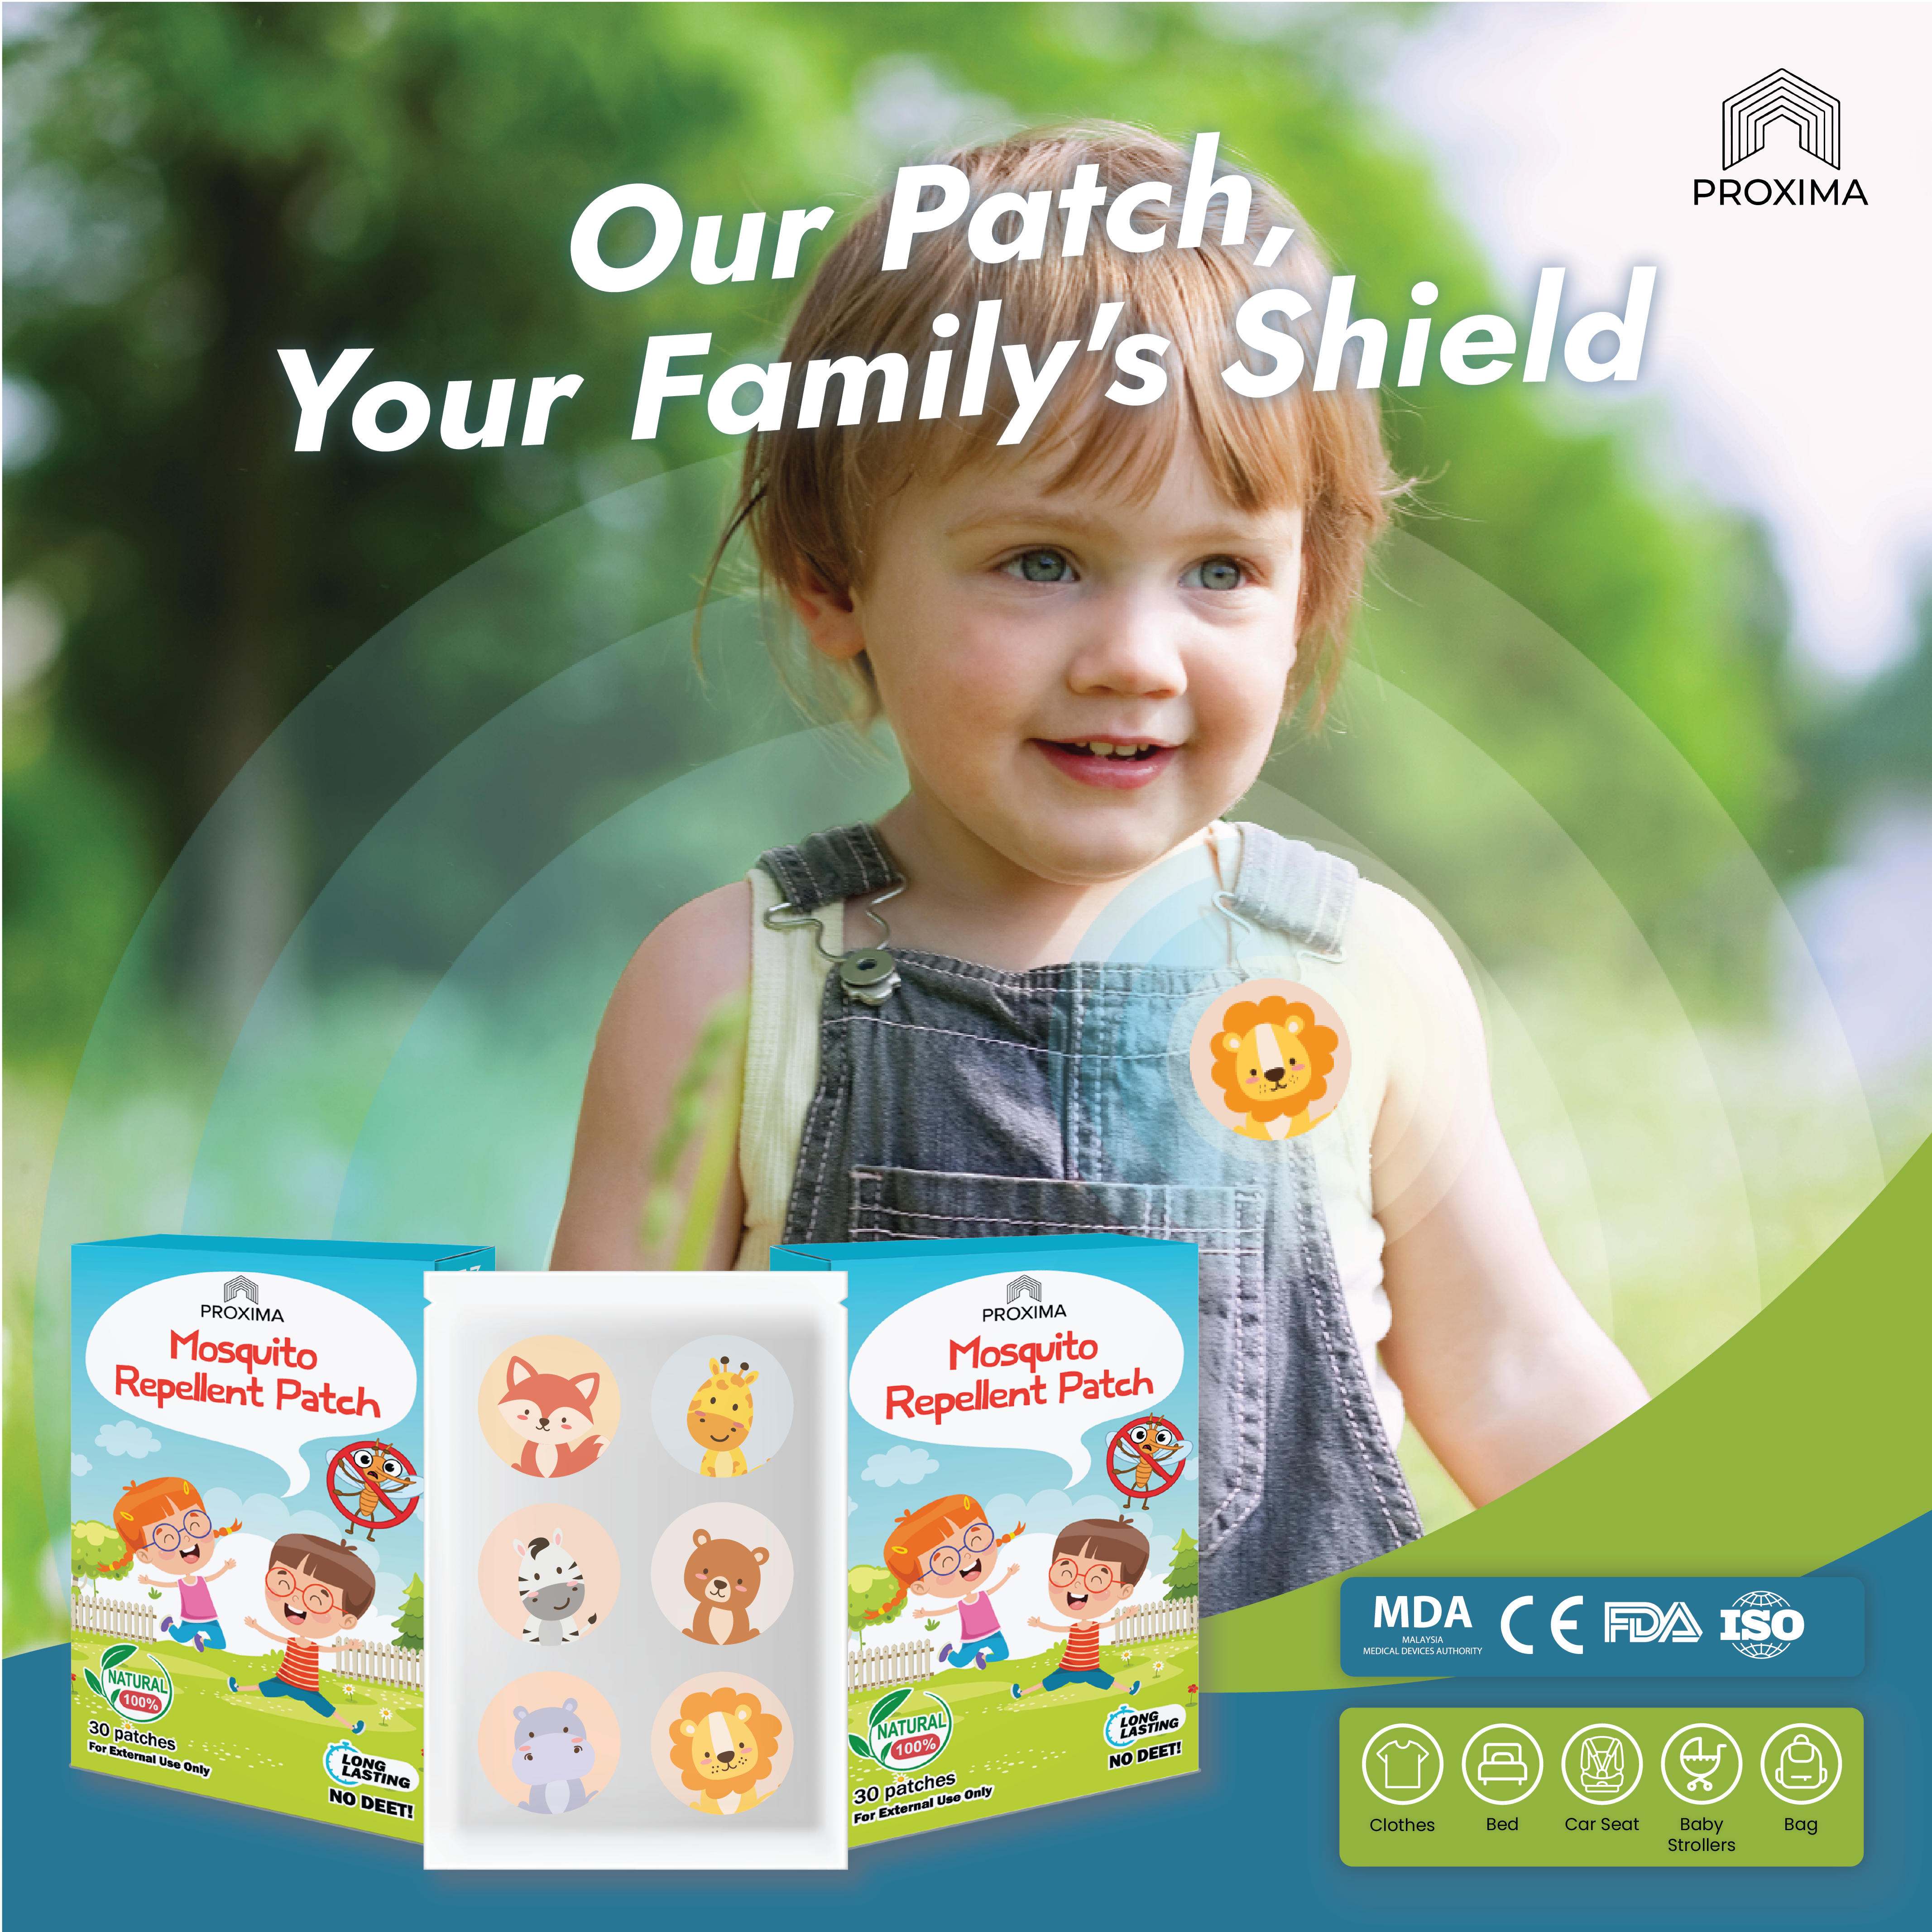 Mosquito Repellent Patch Shopee Posting LATEST-01